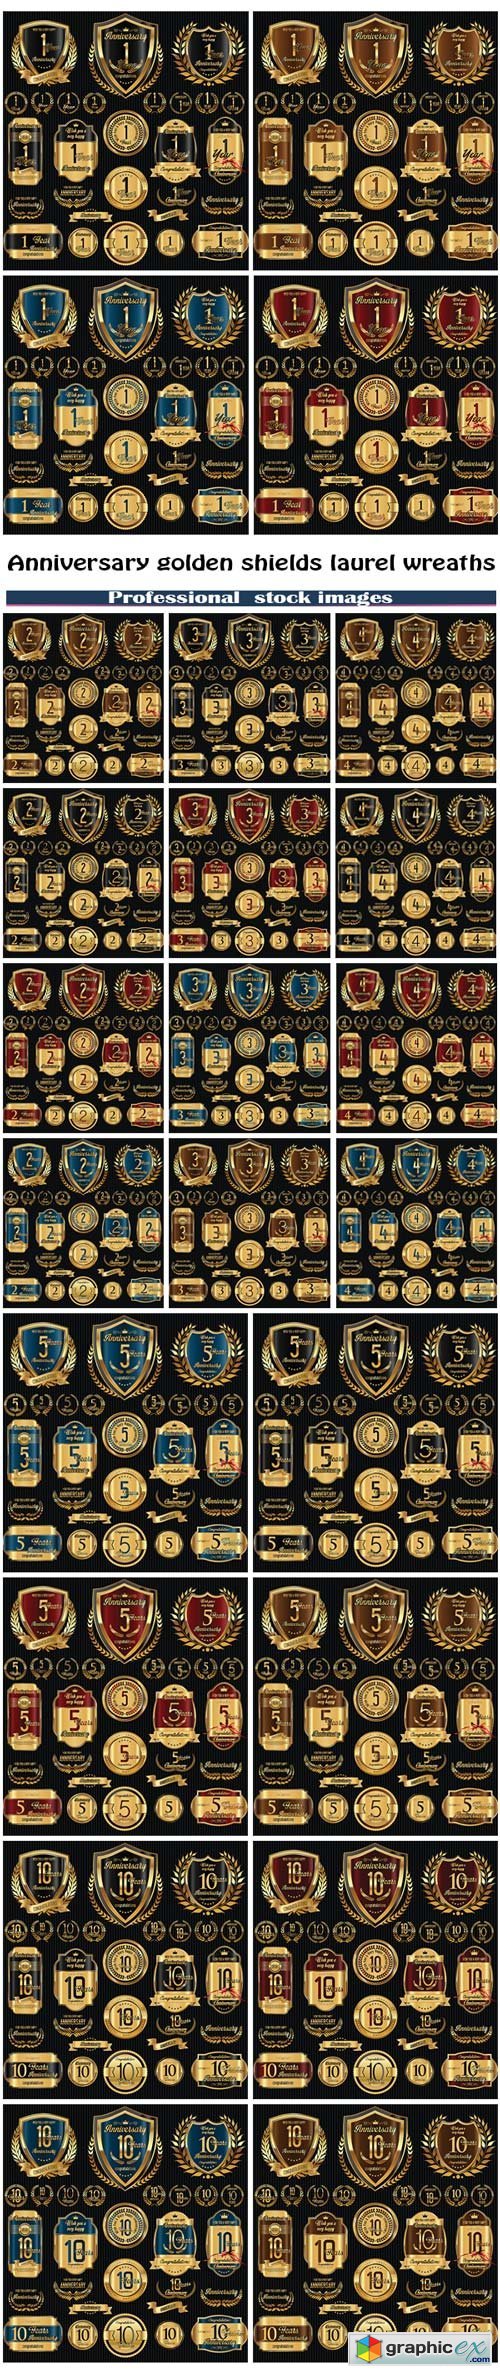 Anniversary golden shields laurel wreaths and badges collection